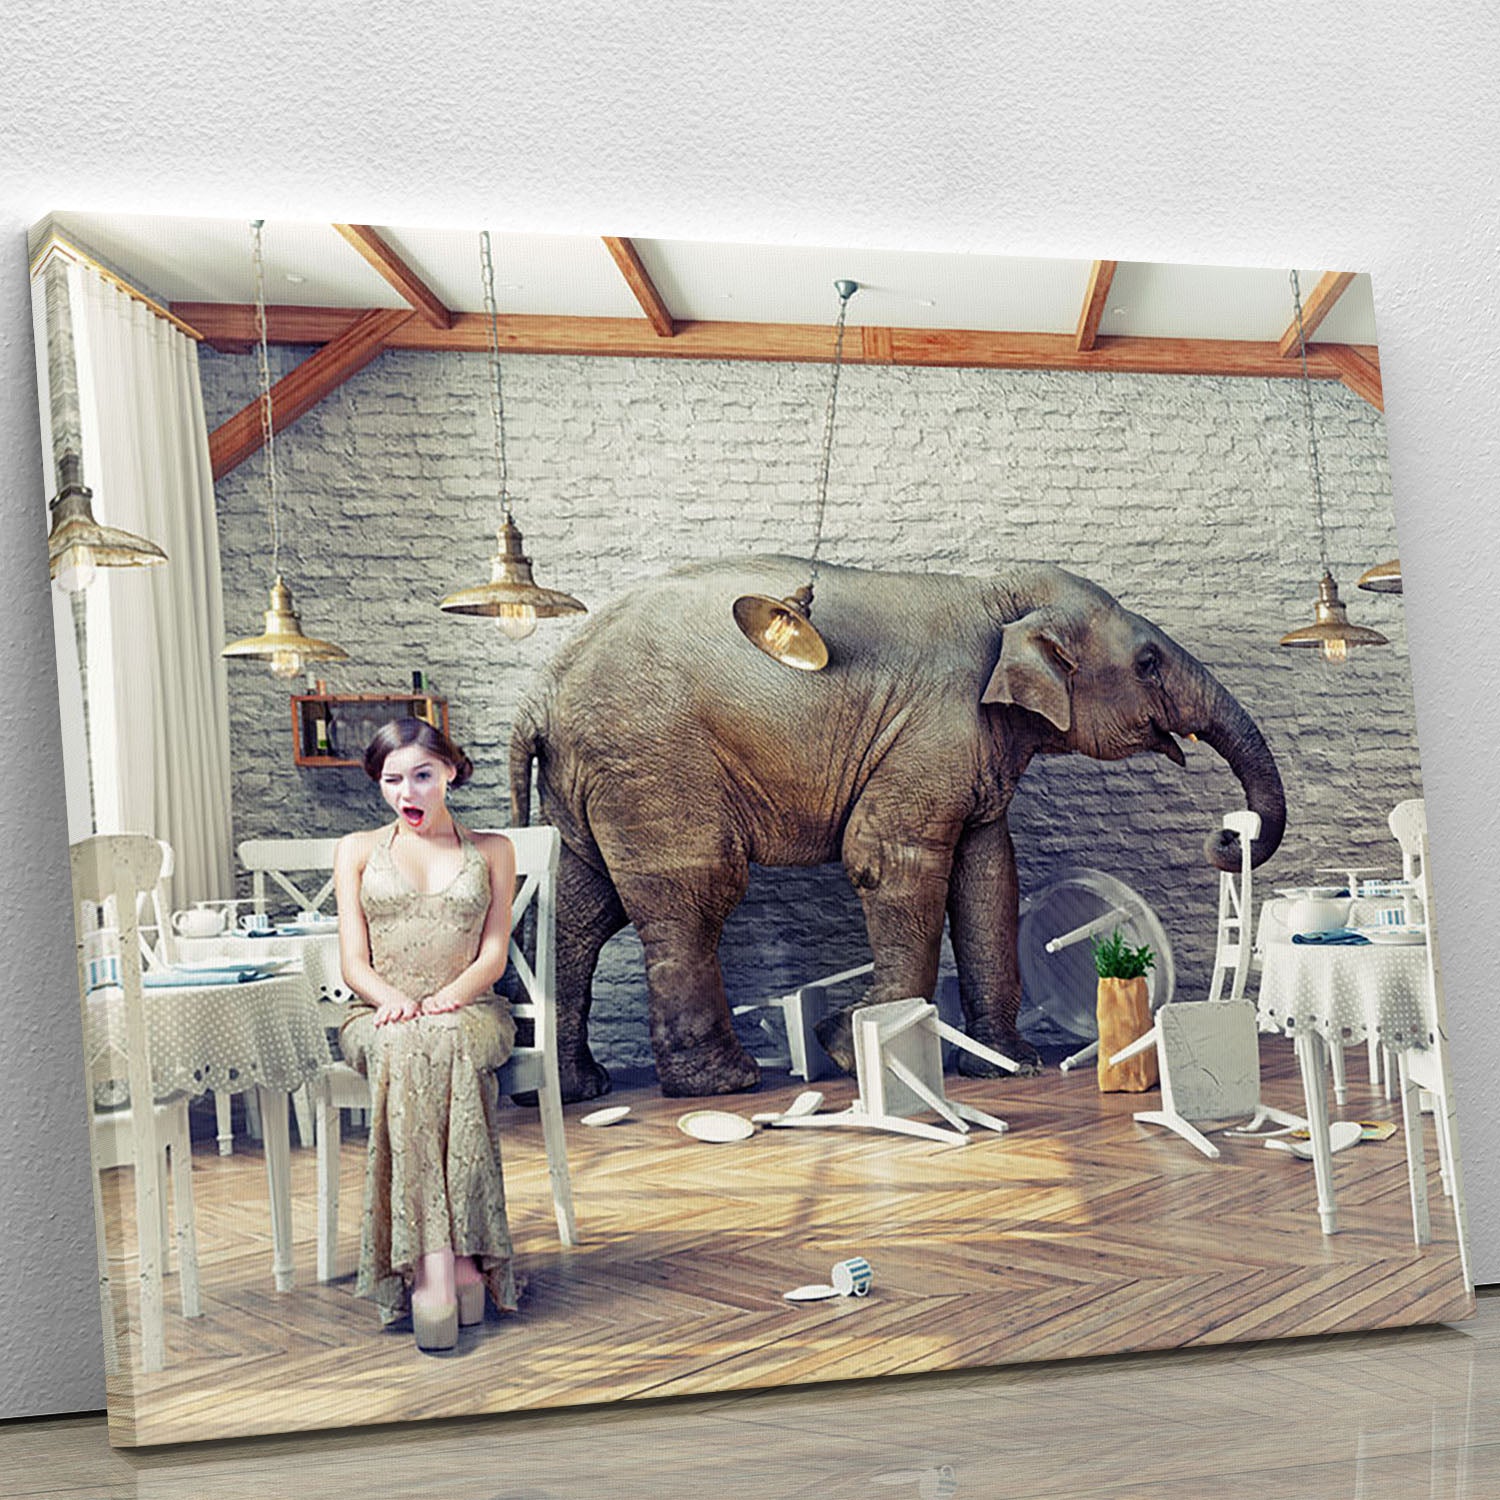 The elephant calm in a restaurant interior. photo combination concept Canvas Print or Poster - Canvas Art Rocks - 1